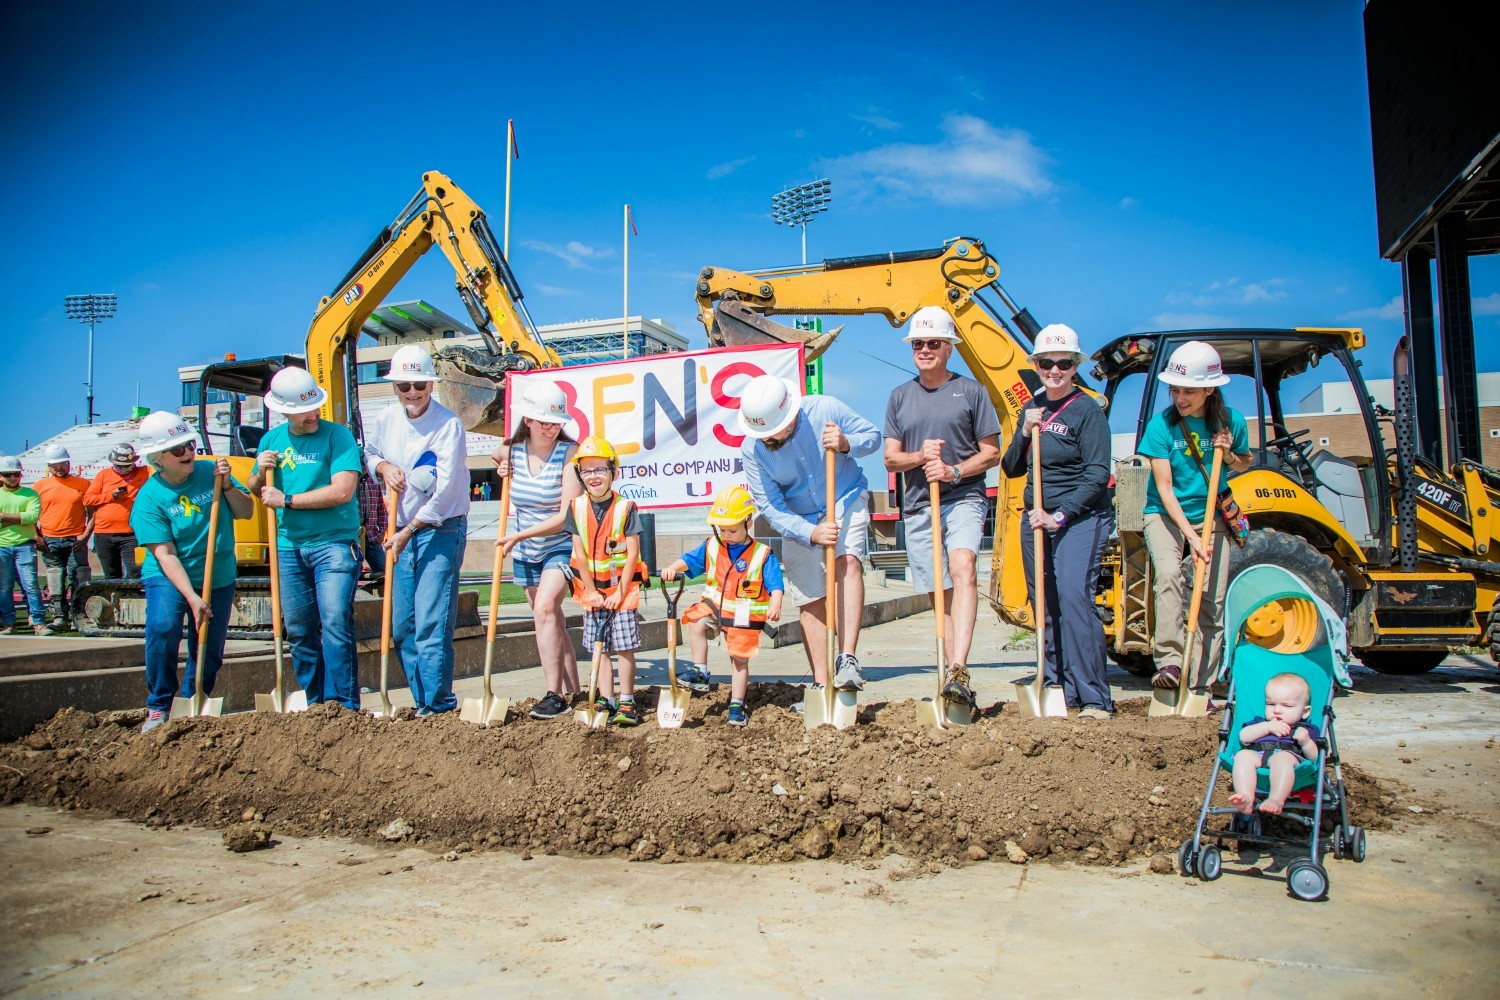 Make-A-Wish: Crossland supported a little boy's dream to be a construction worker with a day filled with activities.